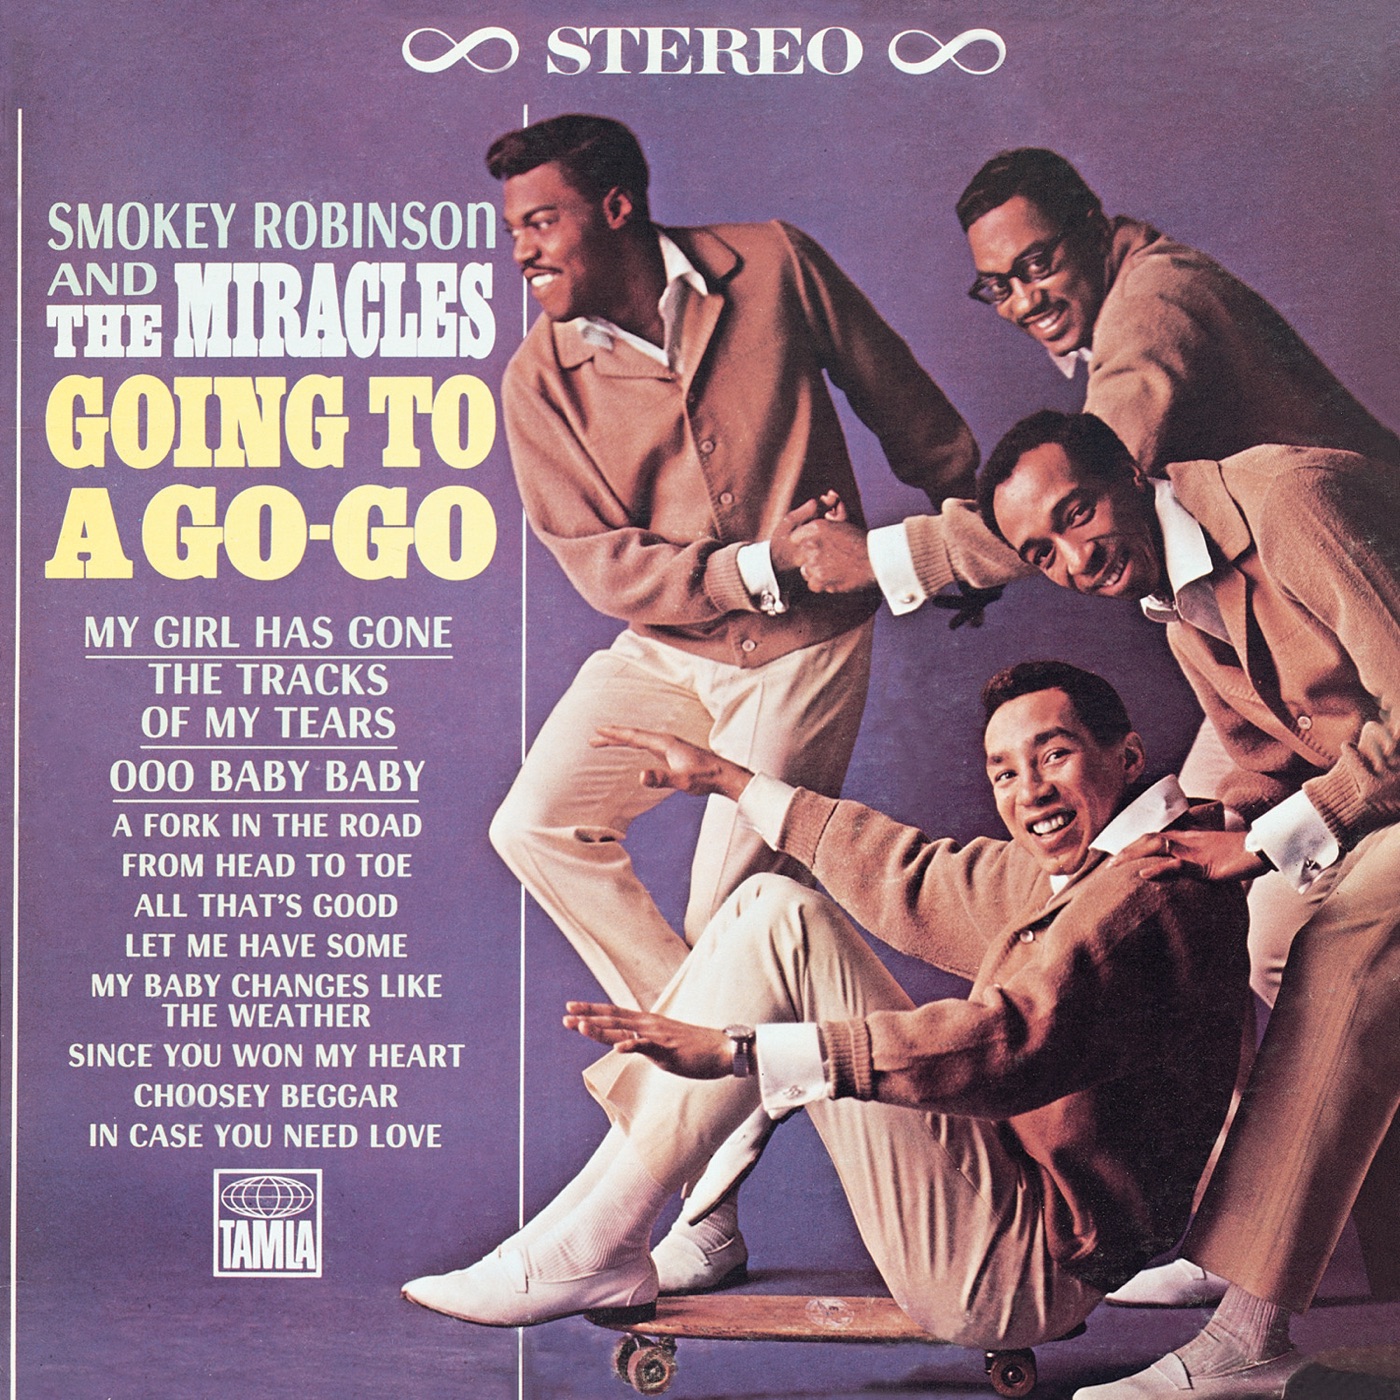 Going To A Go-Go by Smokey Robinson & The Miracles, Smokey Robinson, The Miracles